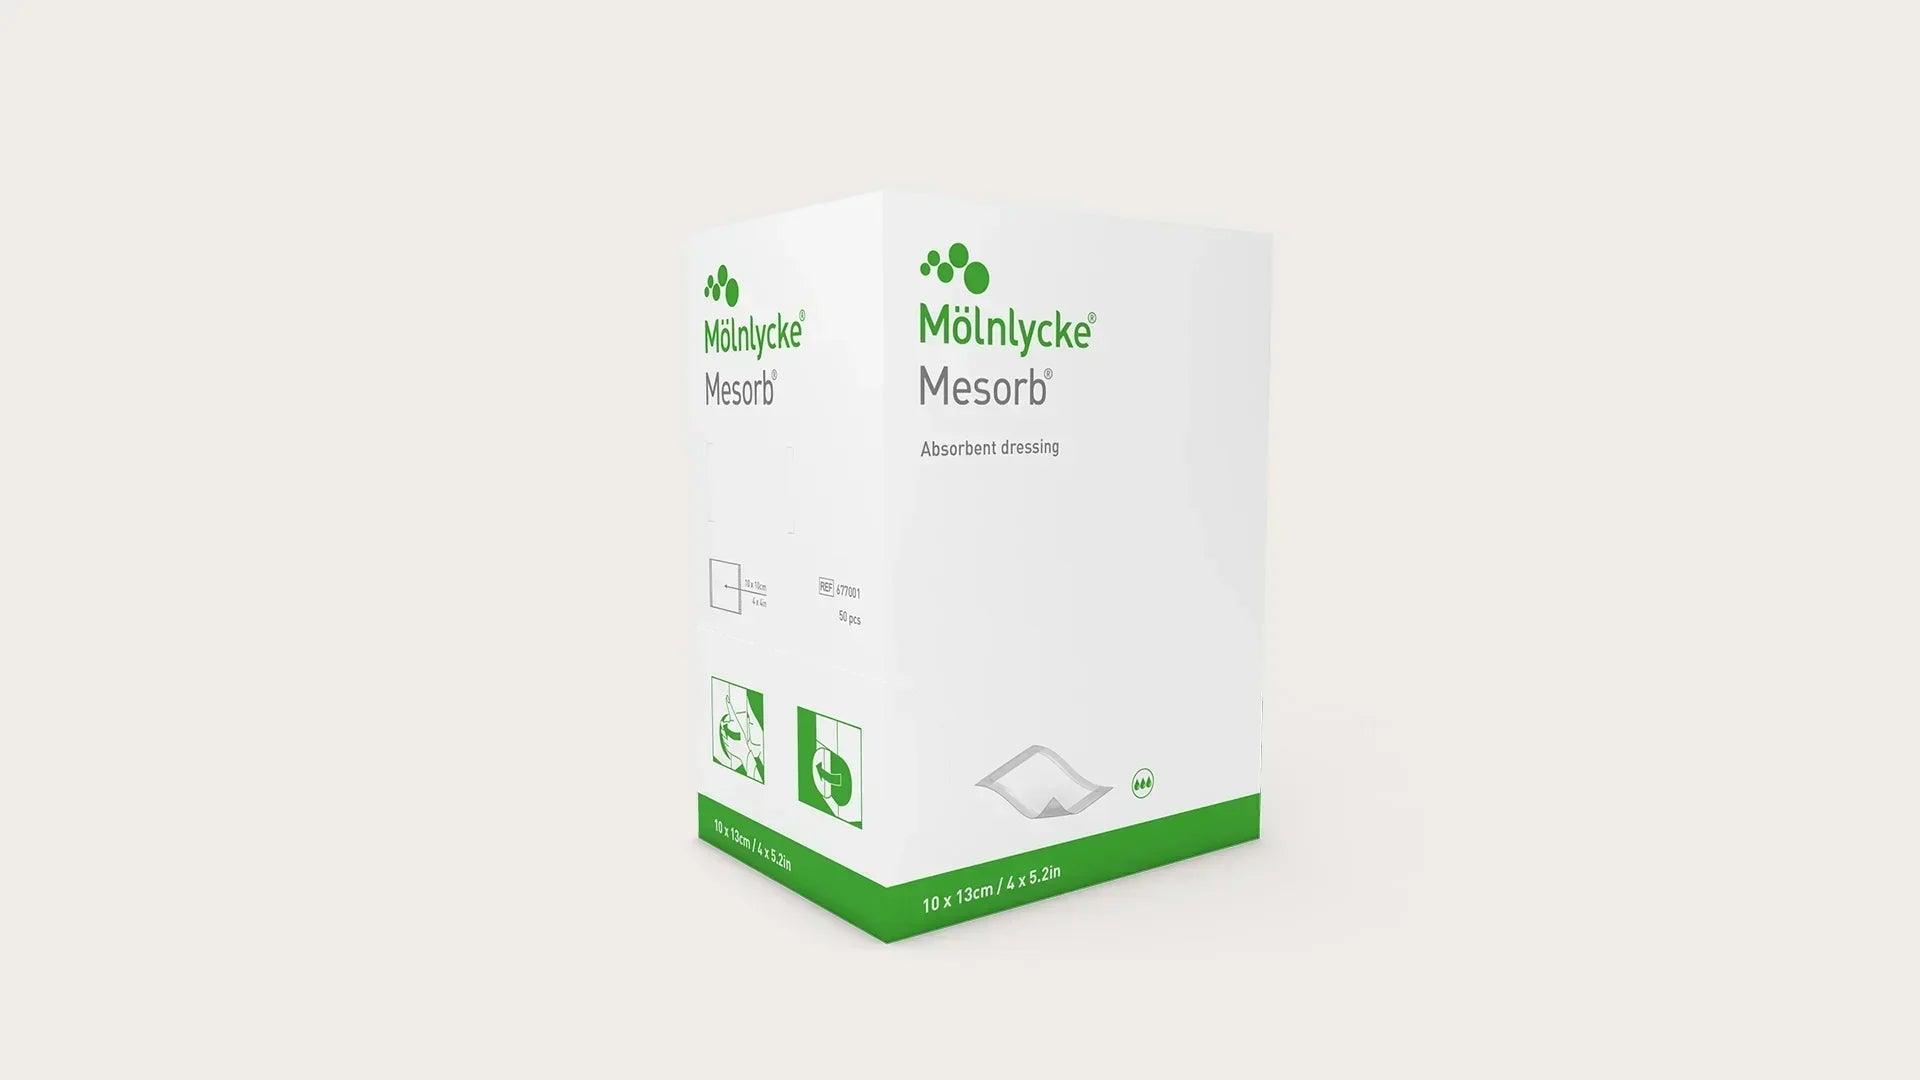 Mesorb Absorbent Dressing by Molnlycke